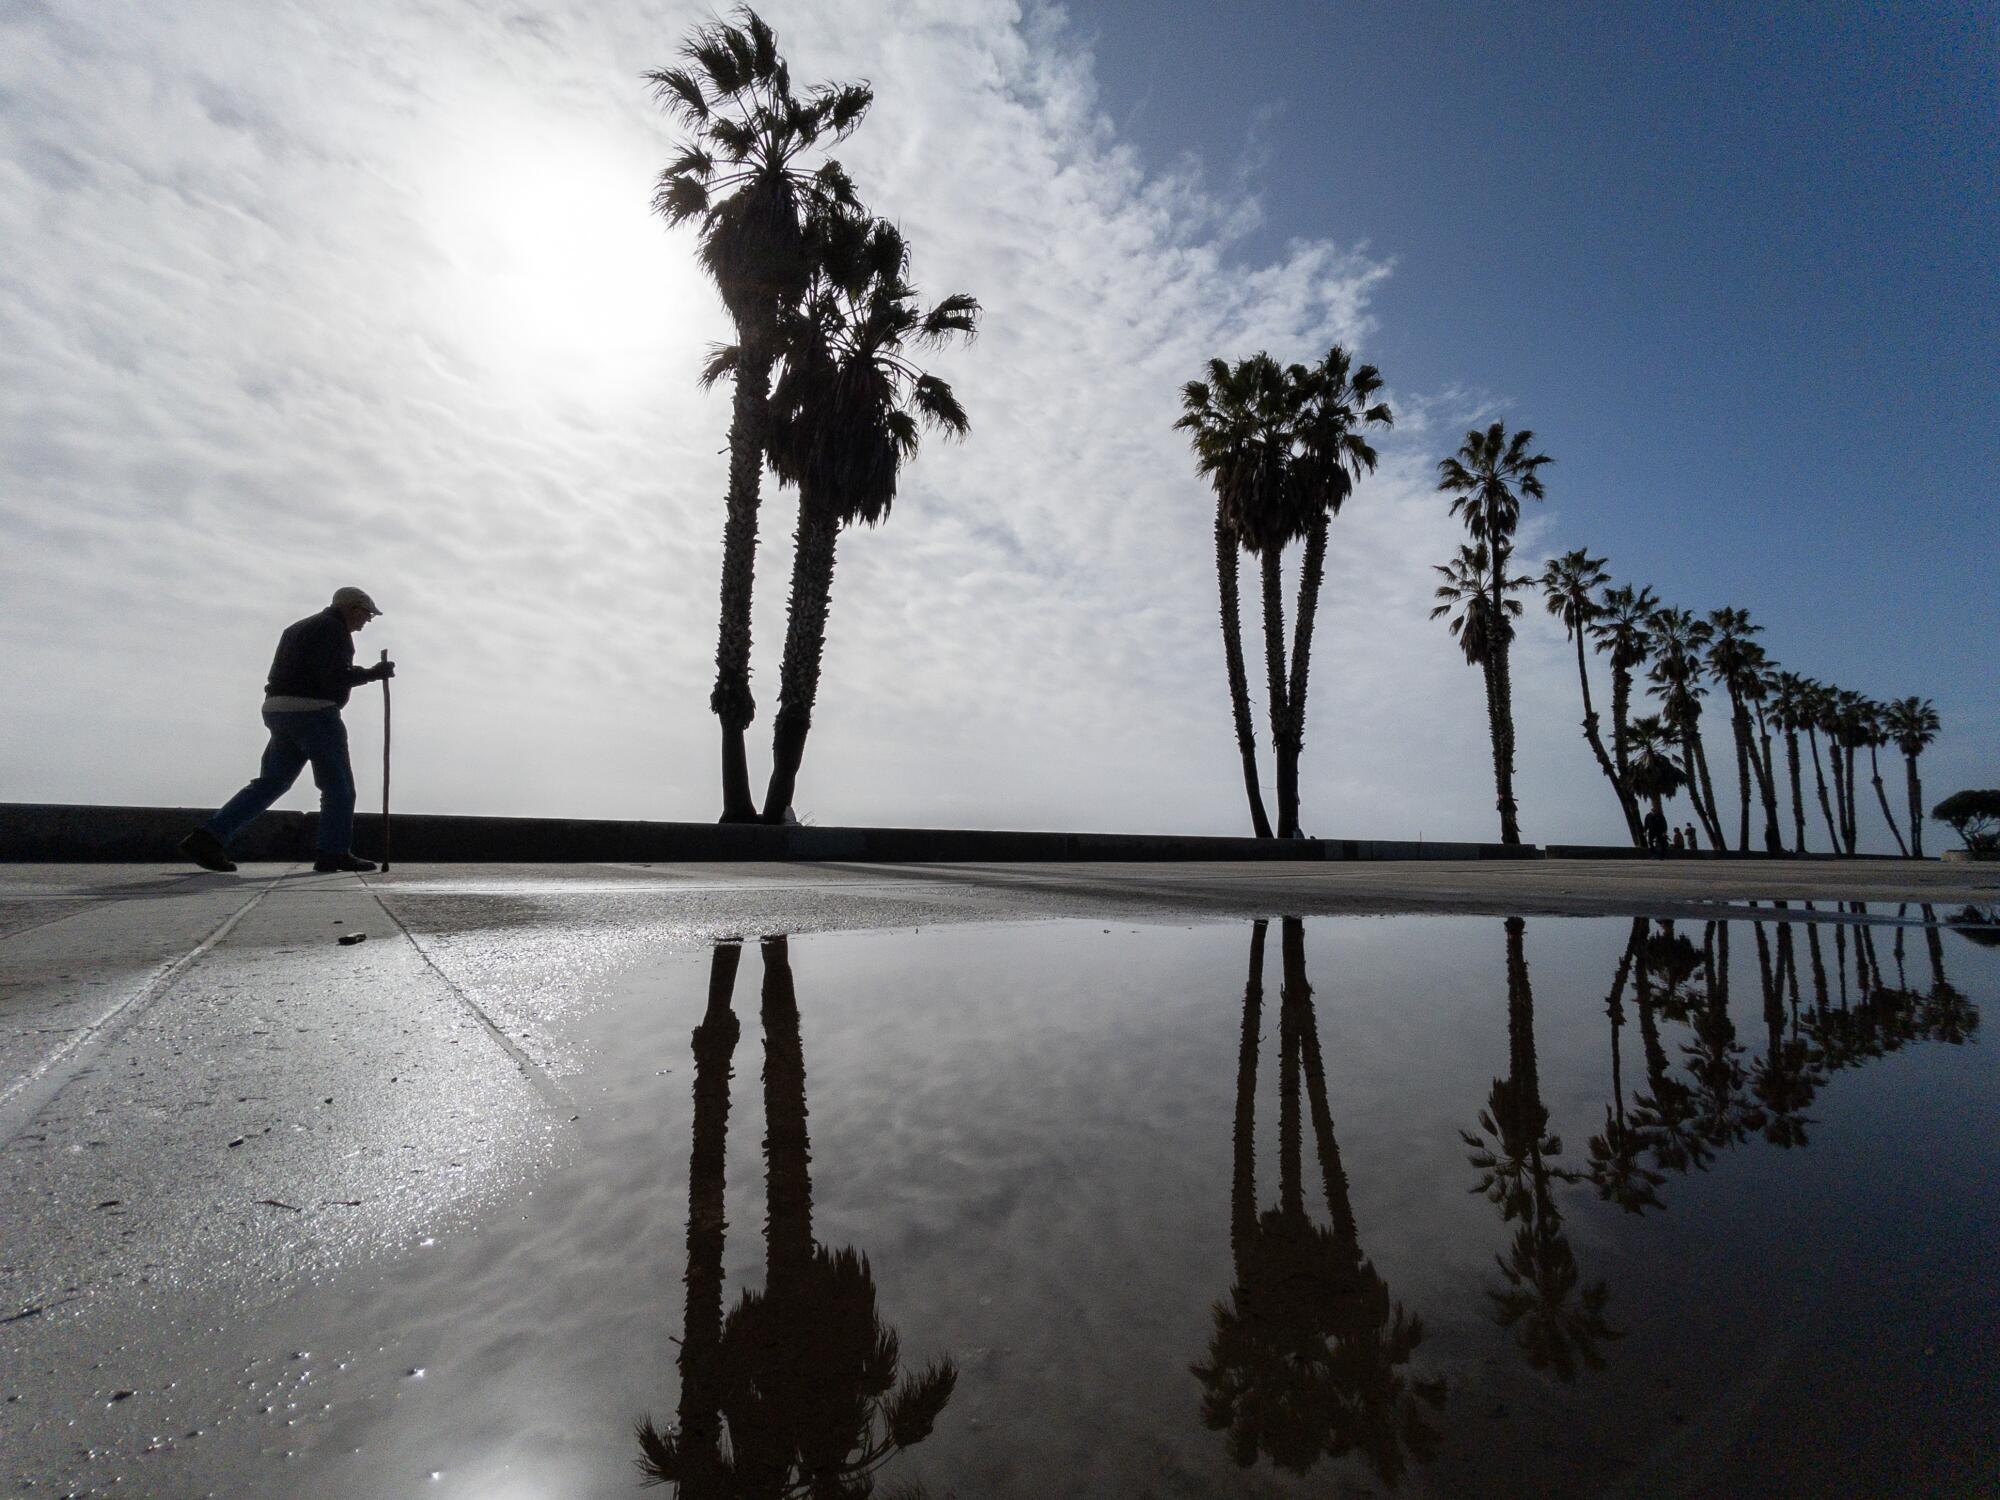 A silhouetted figure walks along a beach where palm trees are reflected in water.